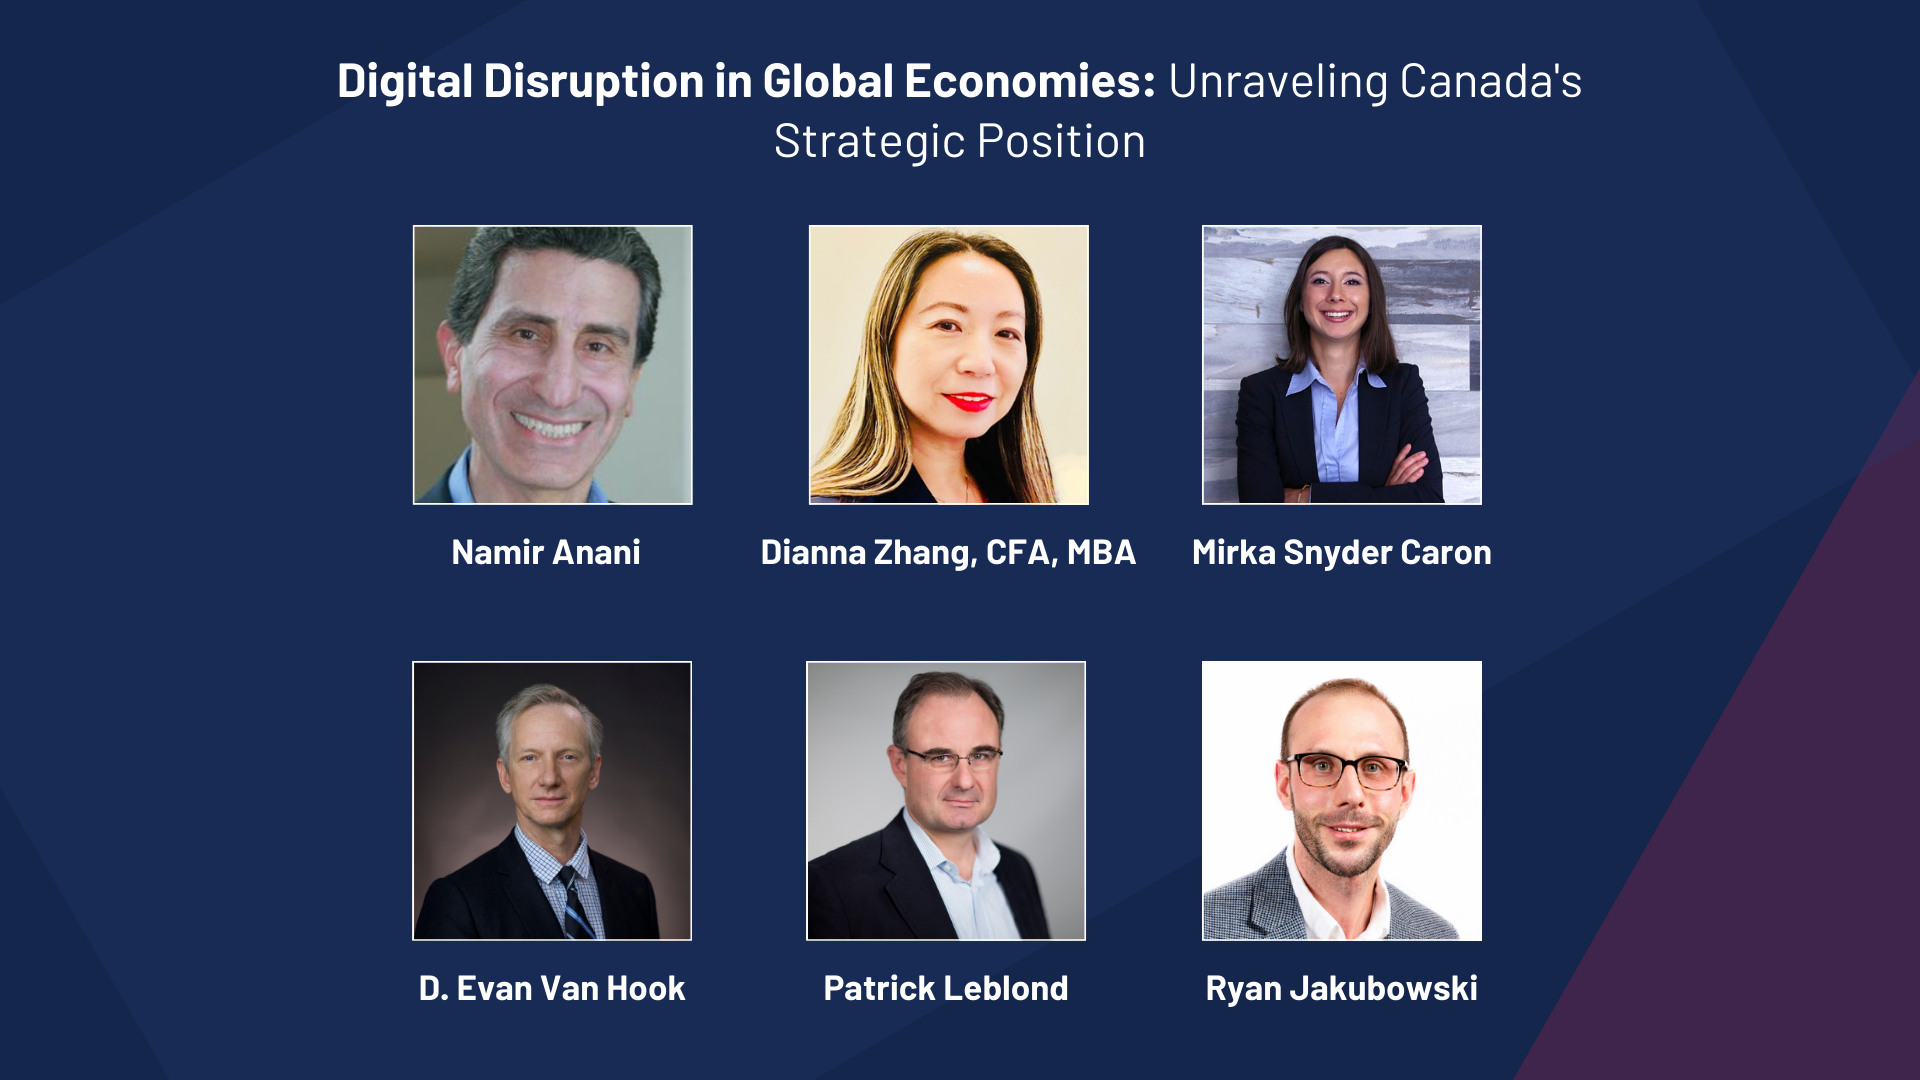 Panel 1: Digital Disruption in Global Economies: Unraveling Canada's Strategic Position